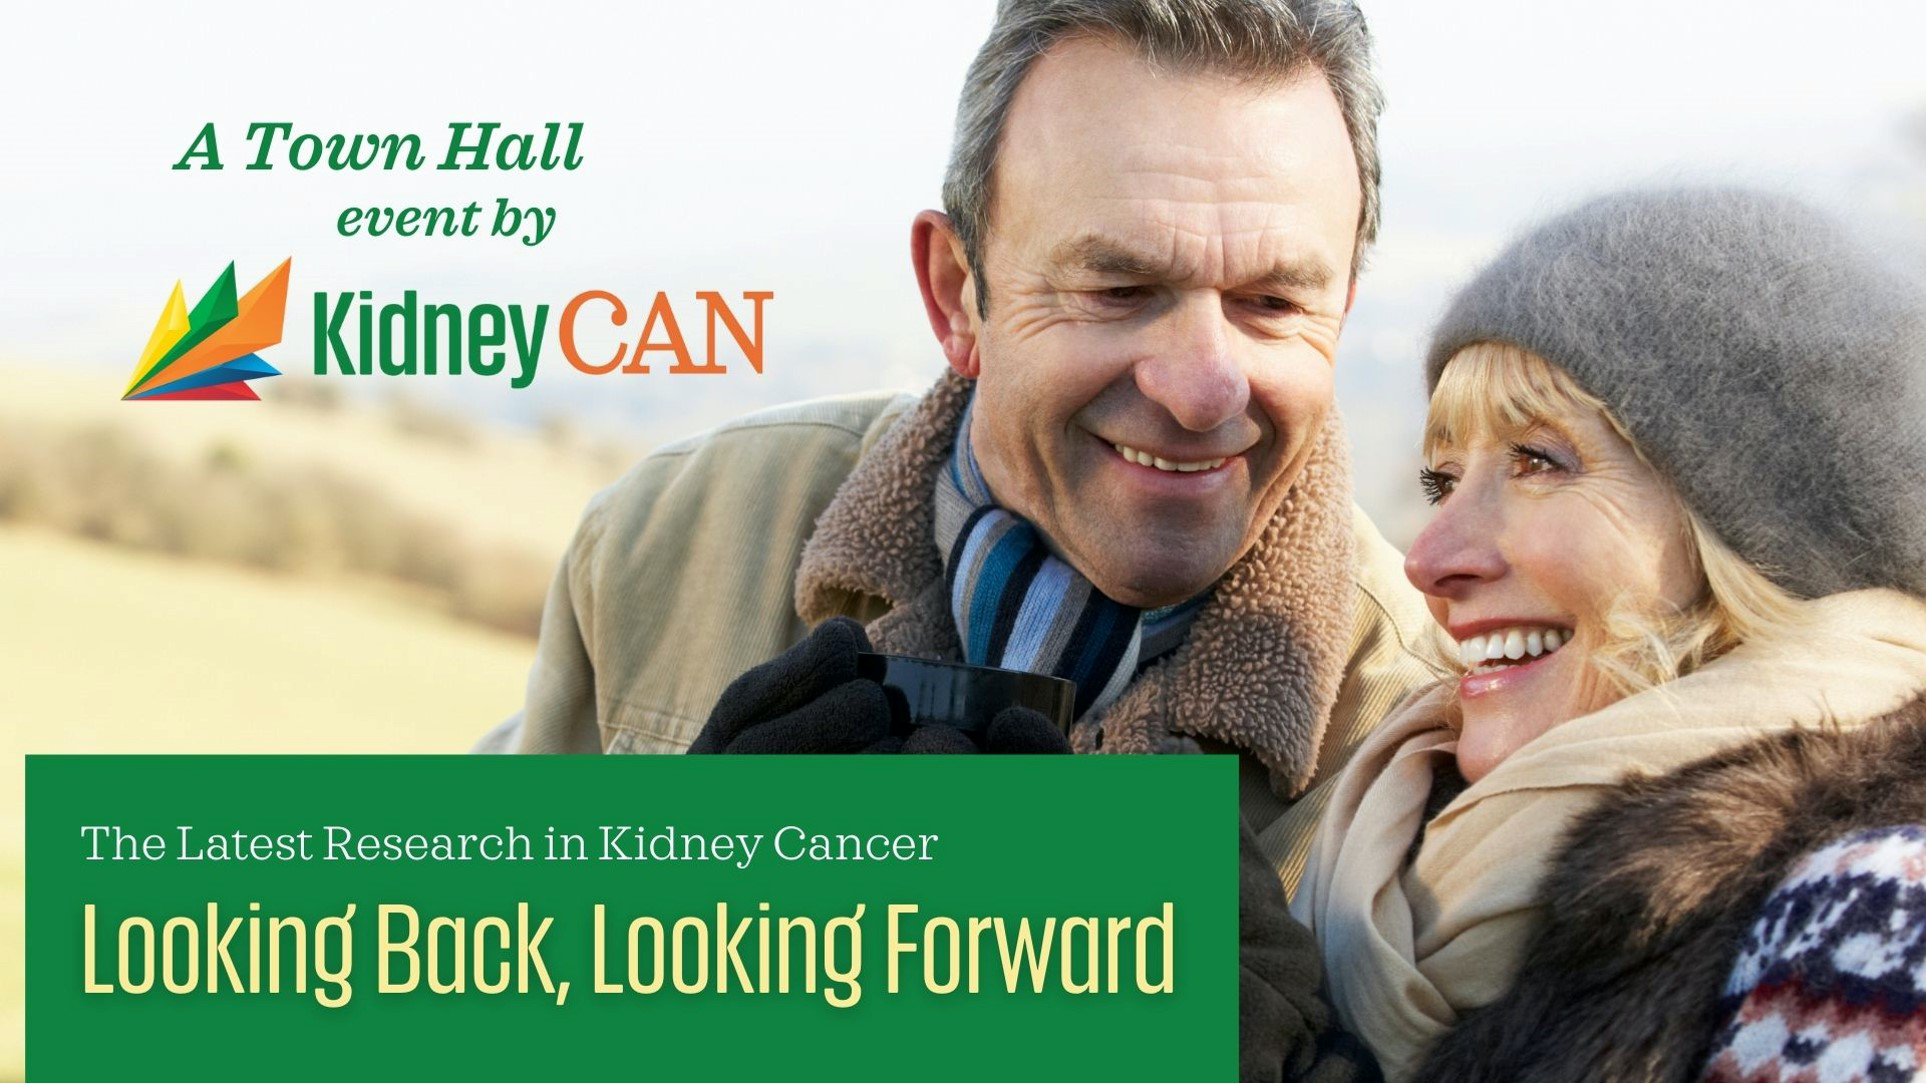 Watch Now: The Latest News in Kidney Cancer Research